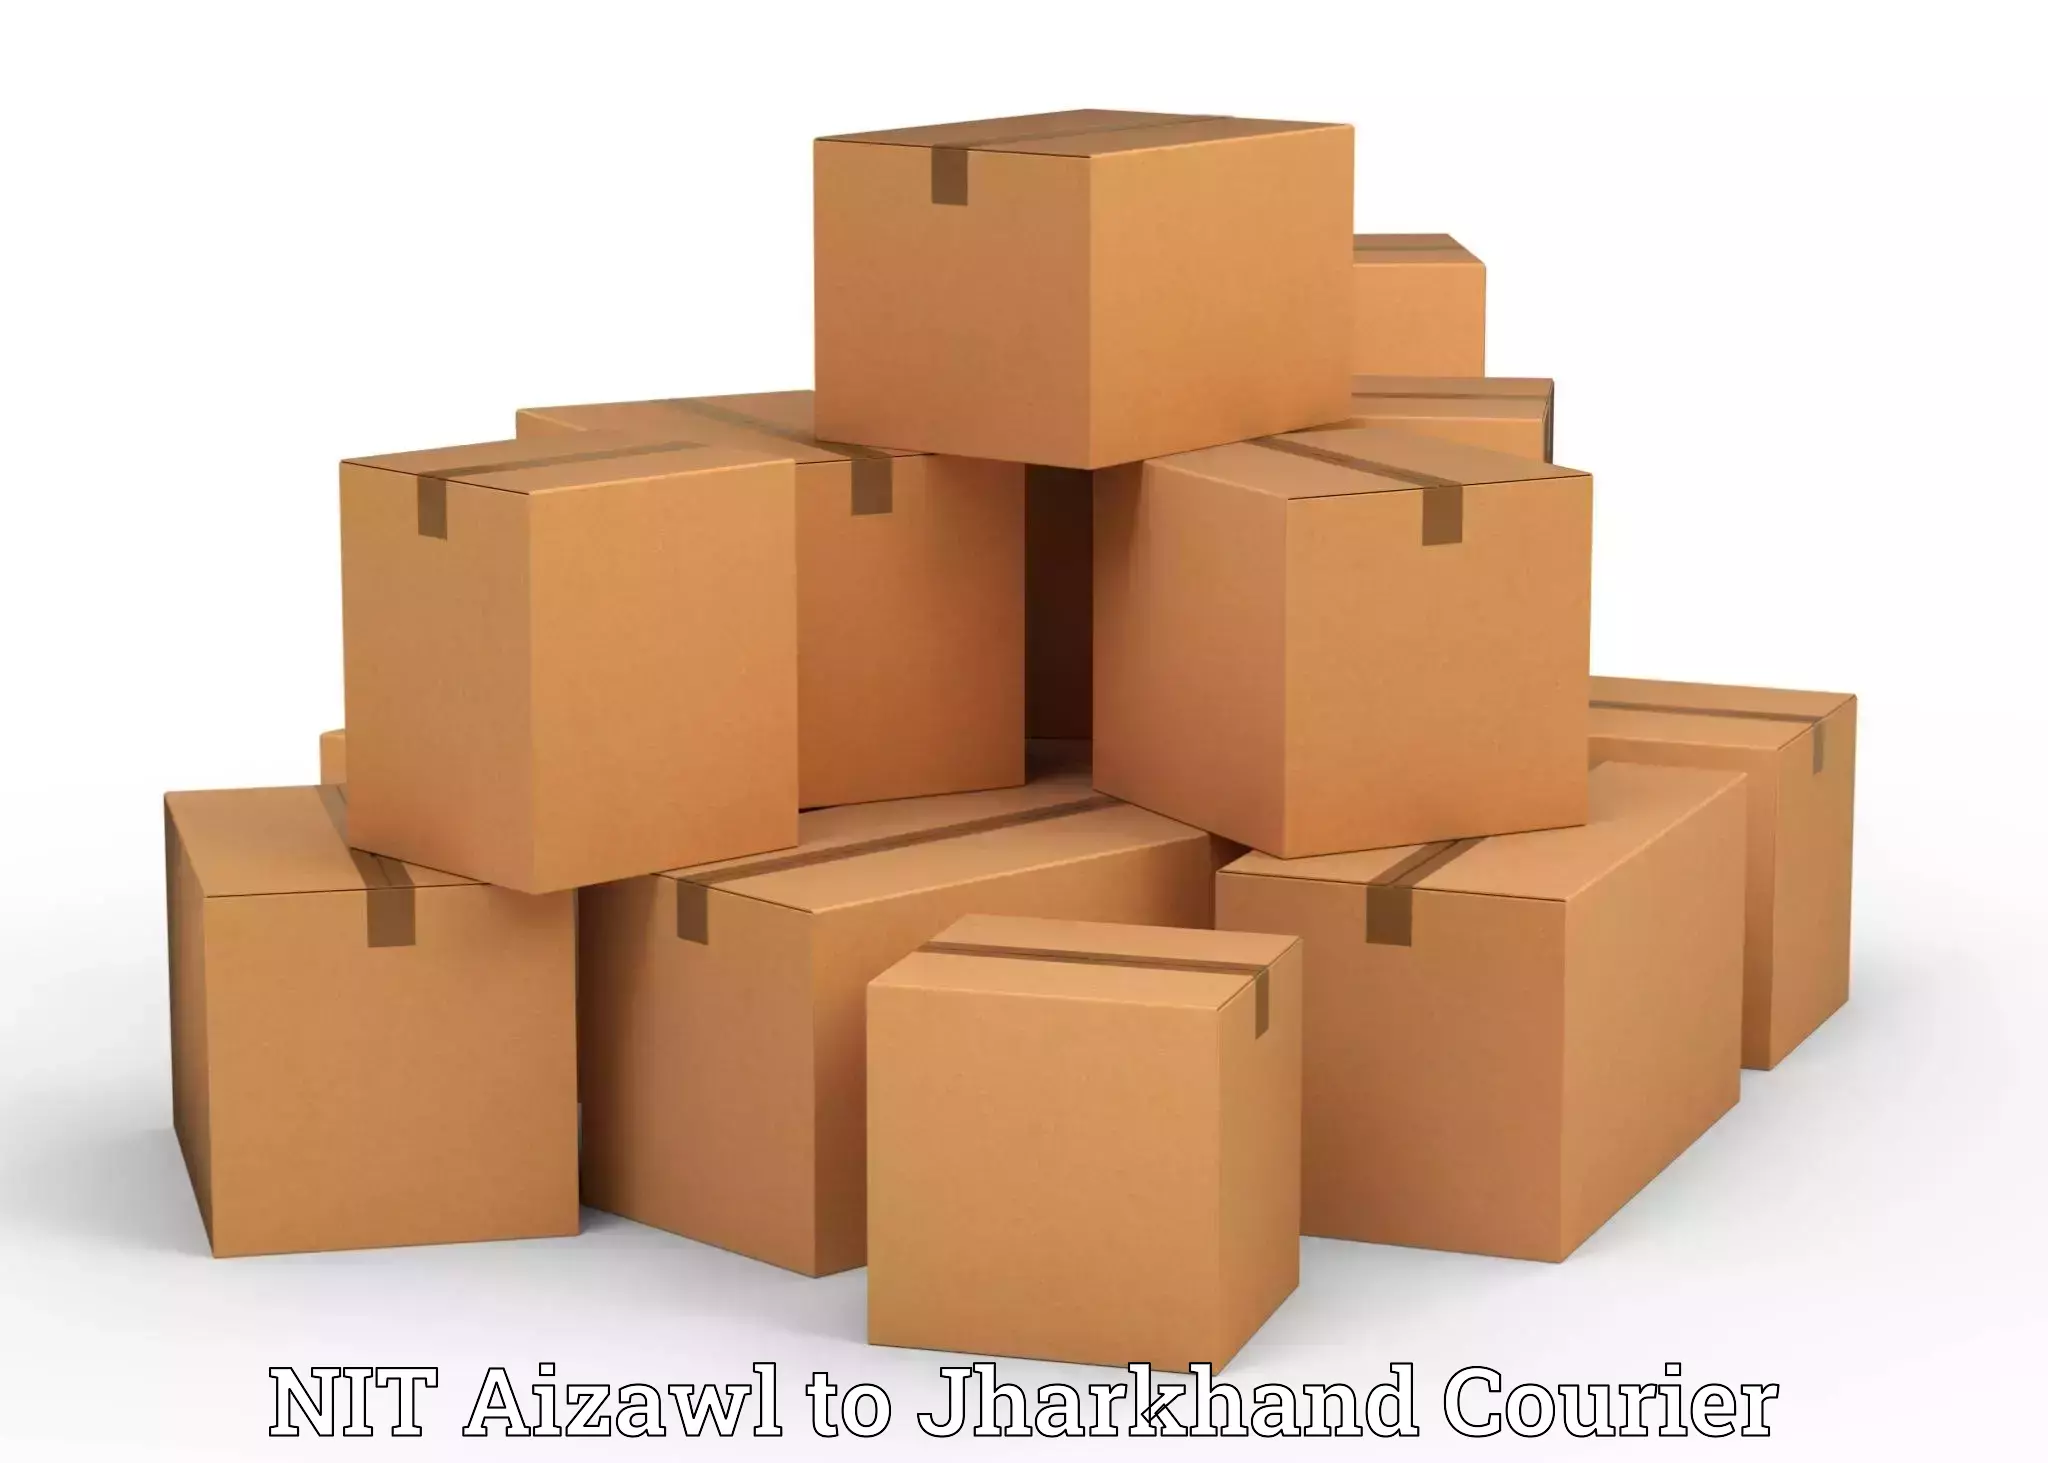 Quality relocation assistance NIT Aizawl to Khunti